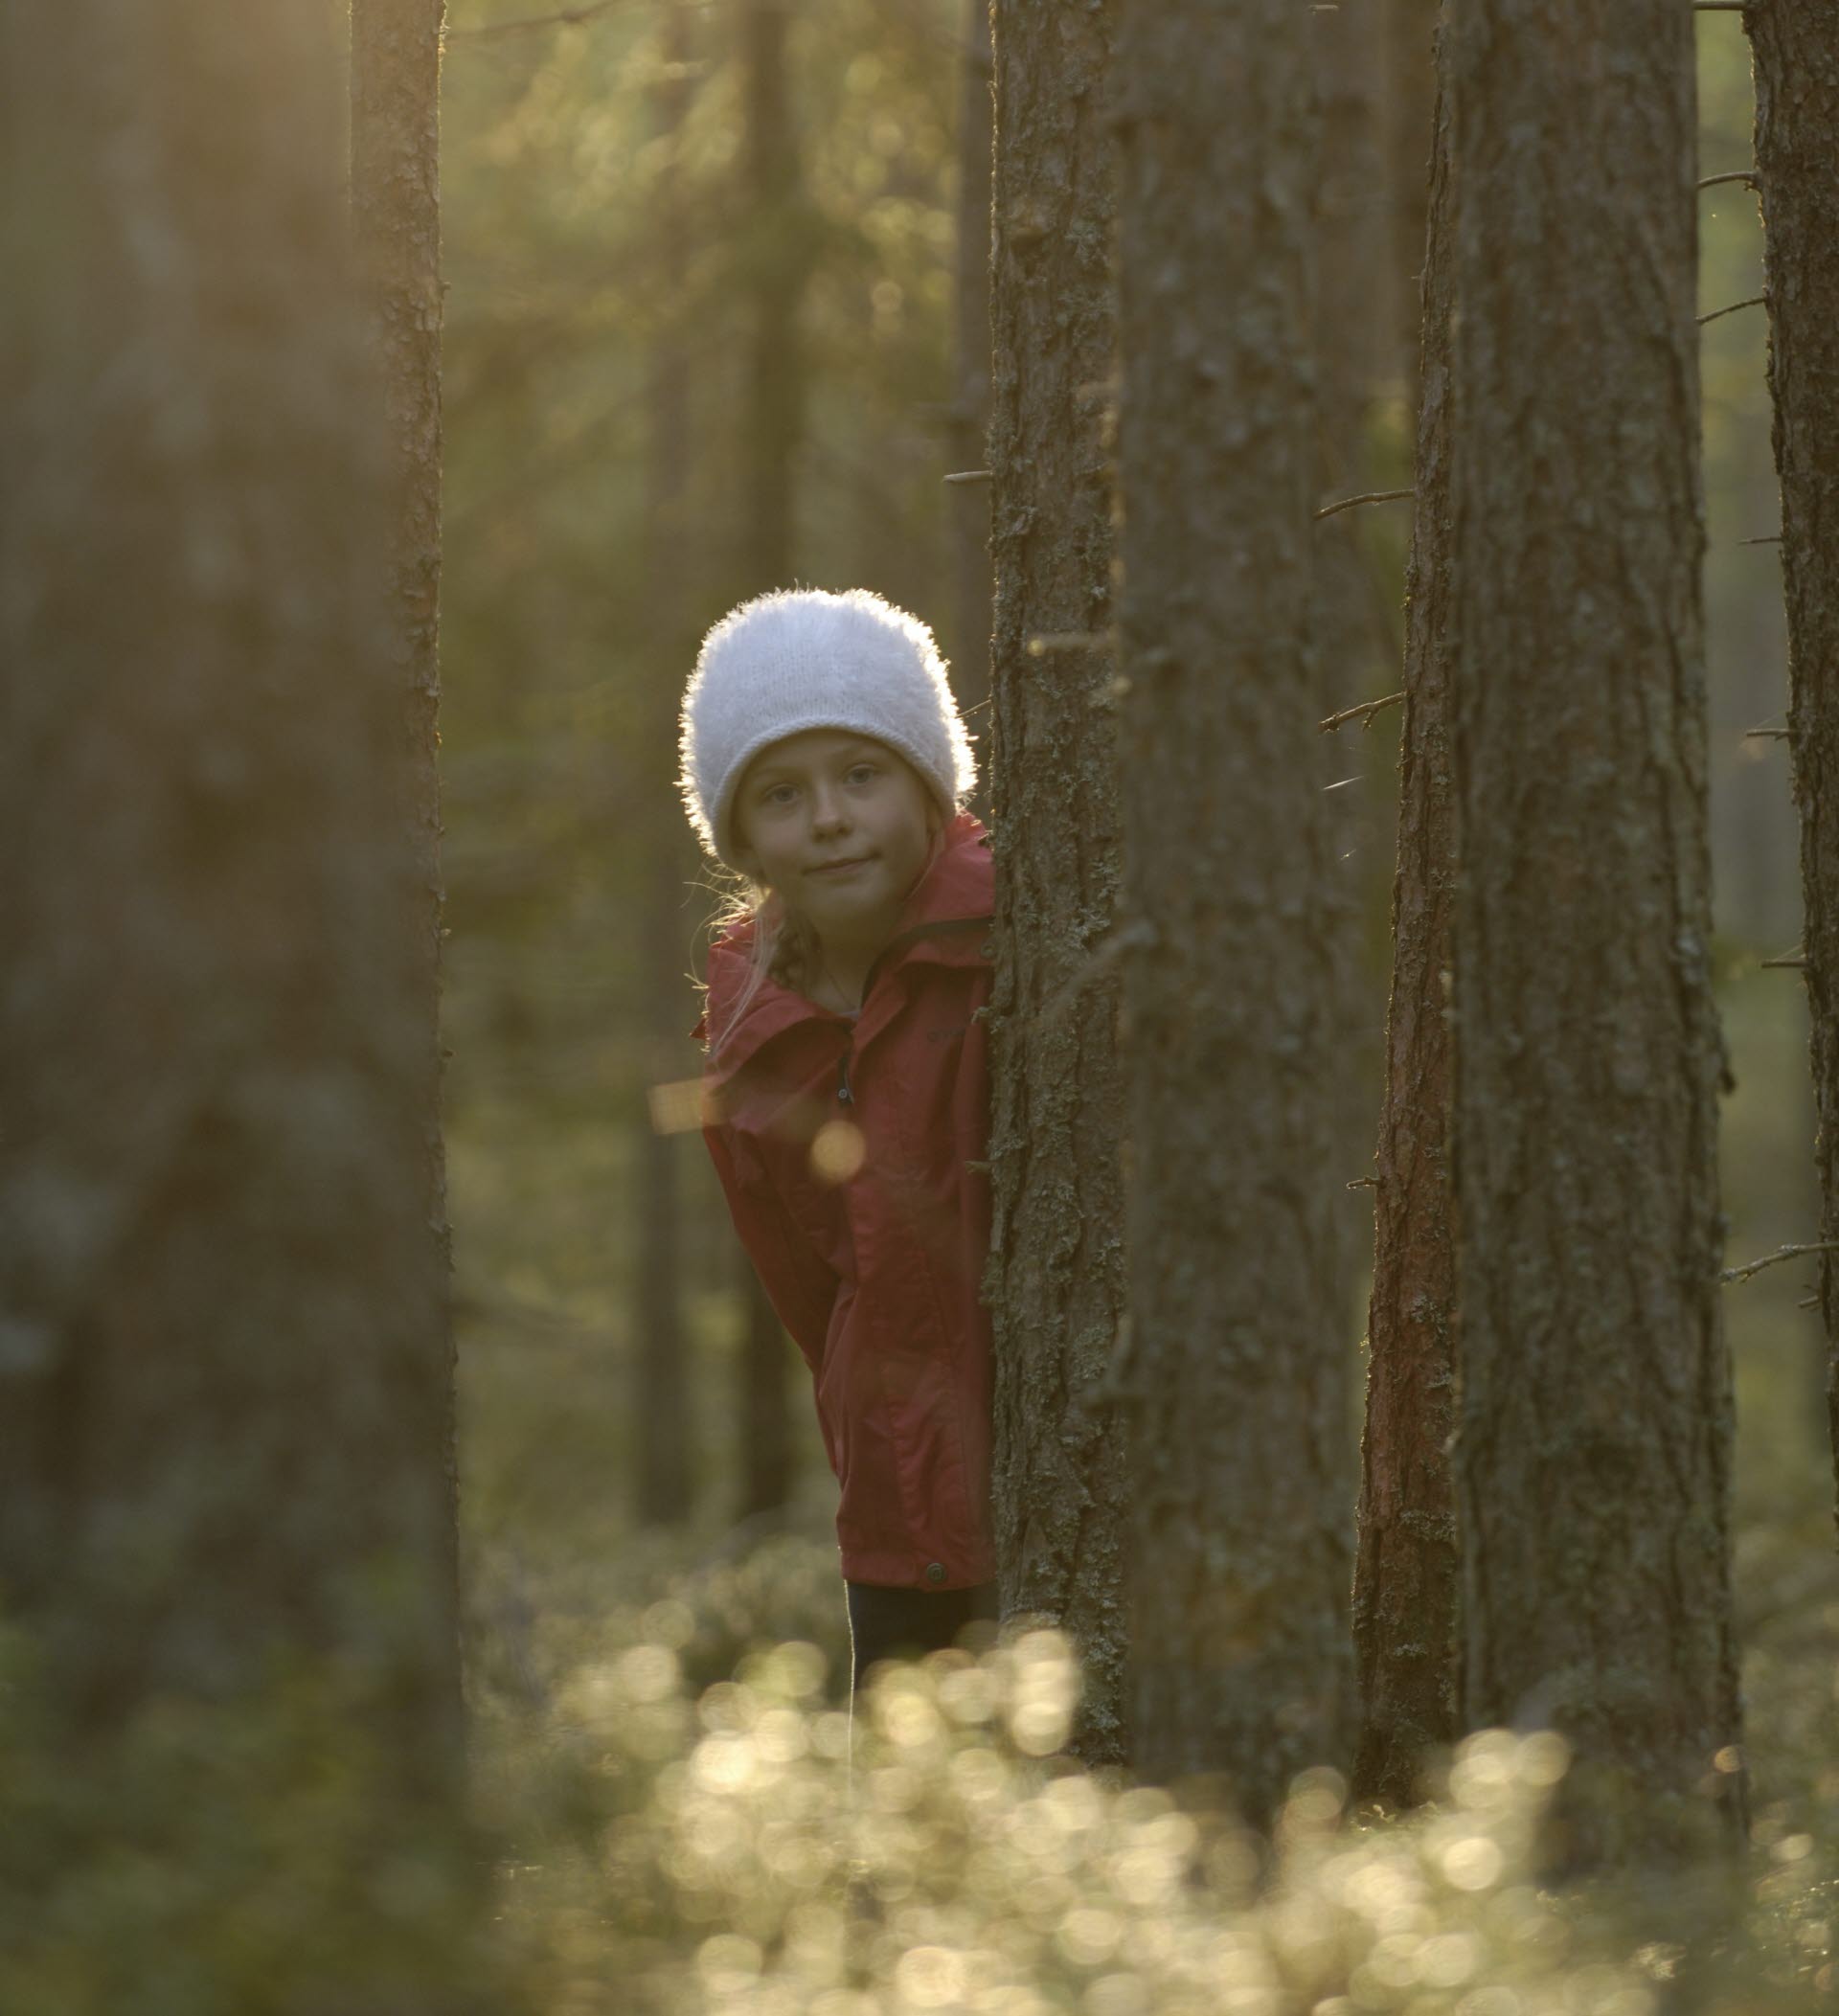 A child peeking out from behind a tree.